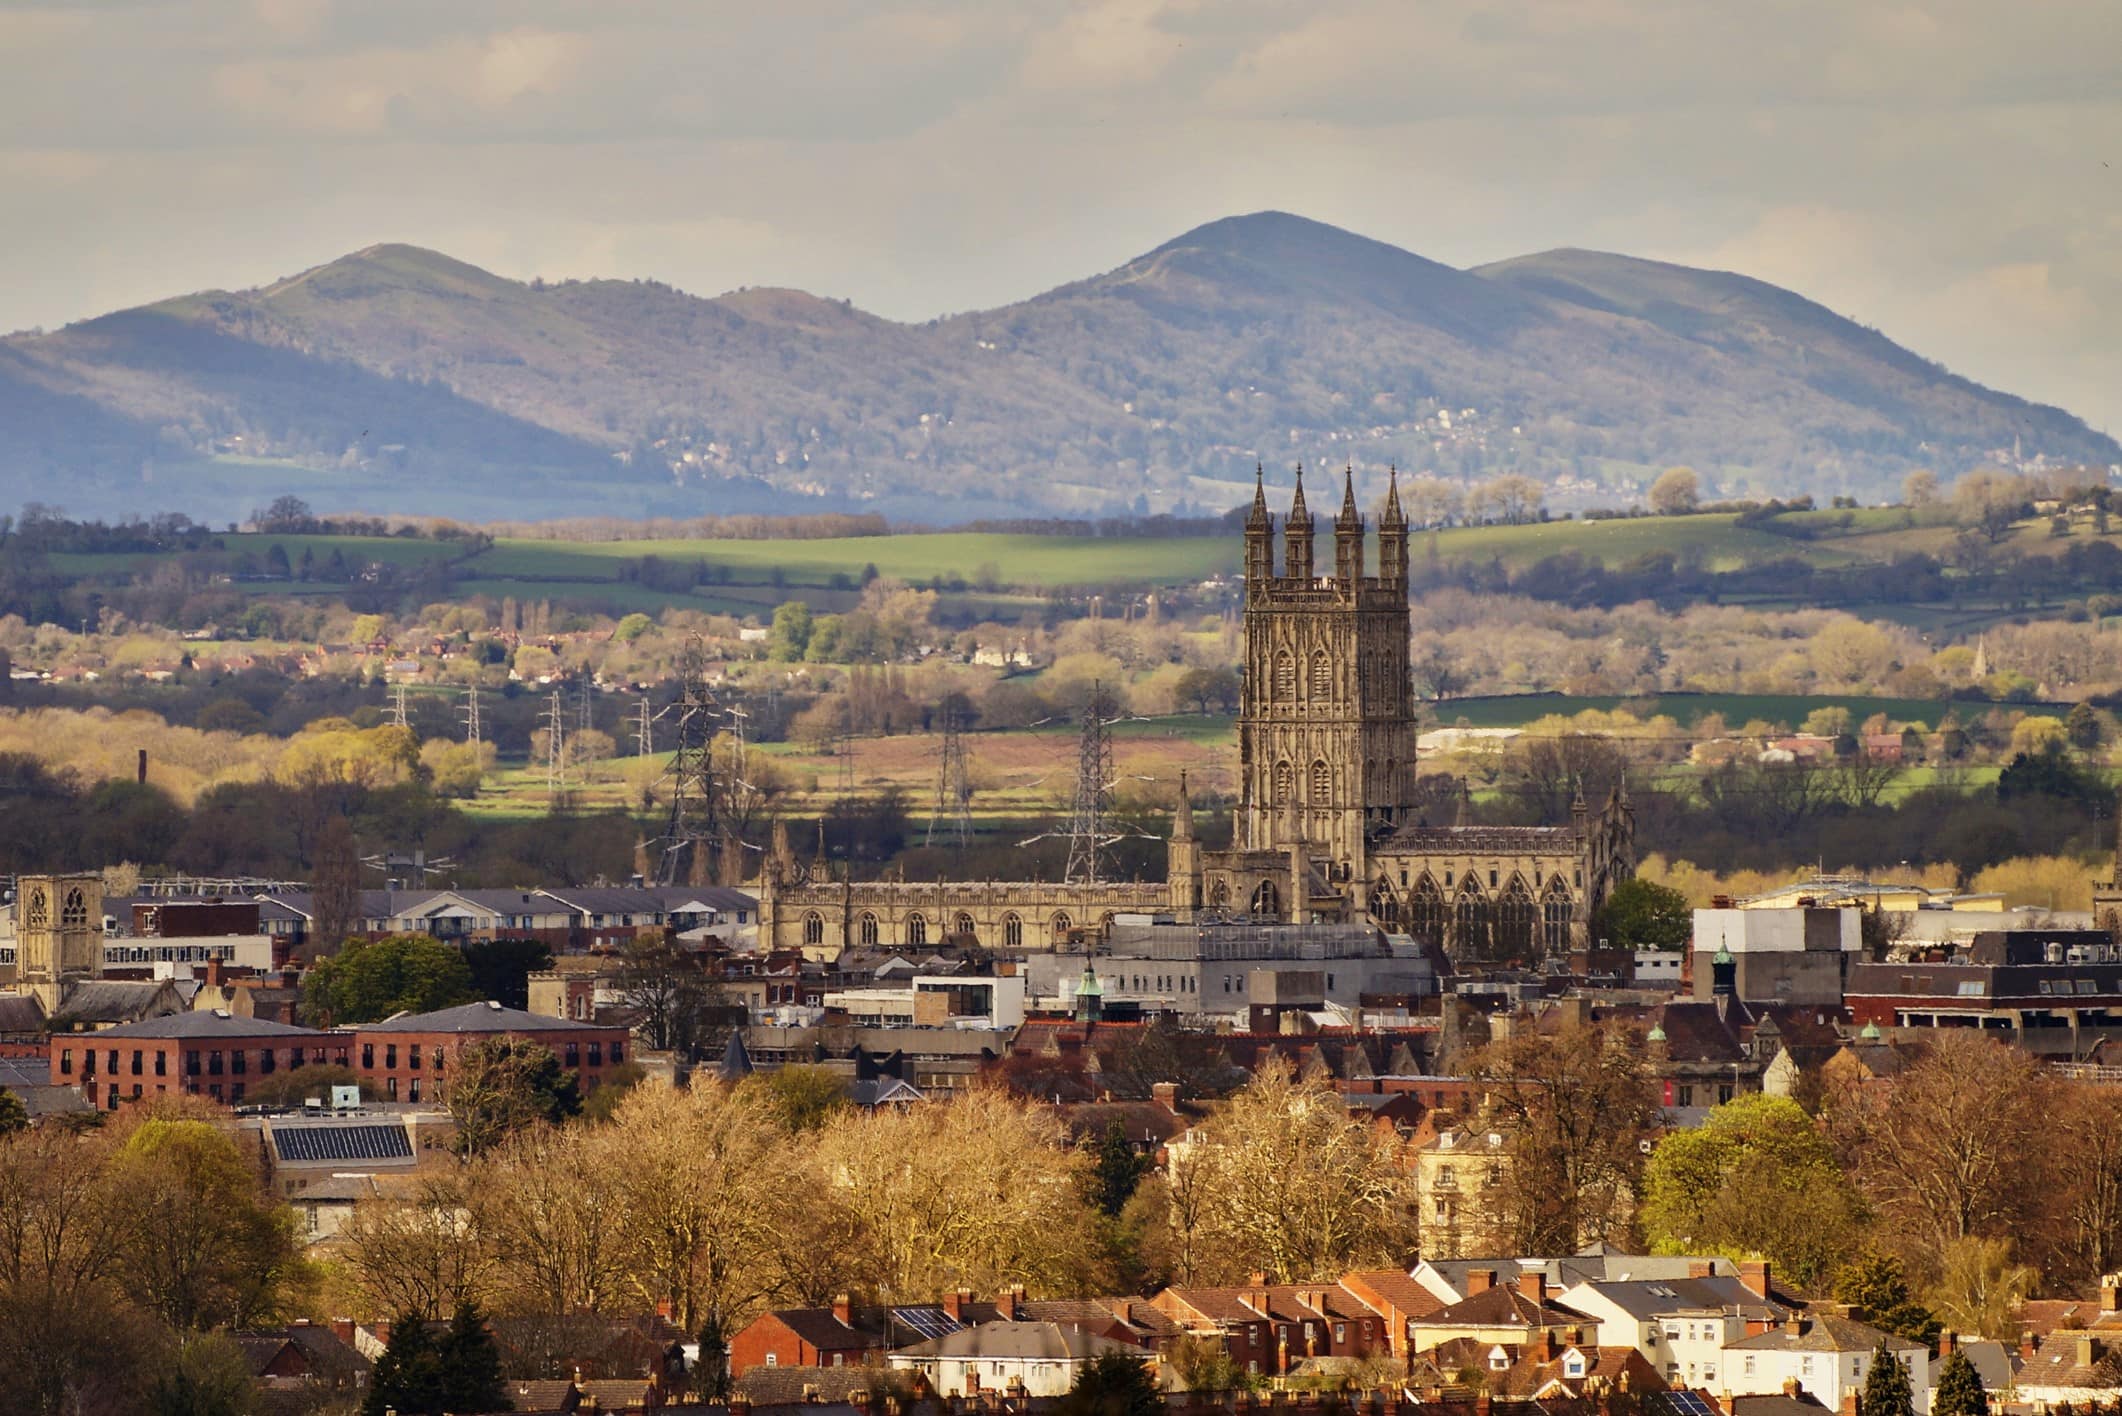 Skyline view of Gloucester, United Kingdom, including the cathedral